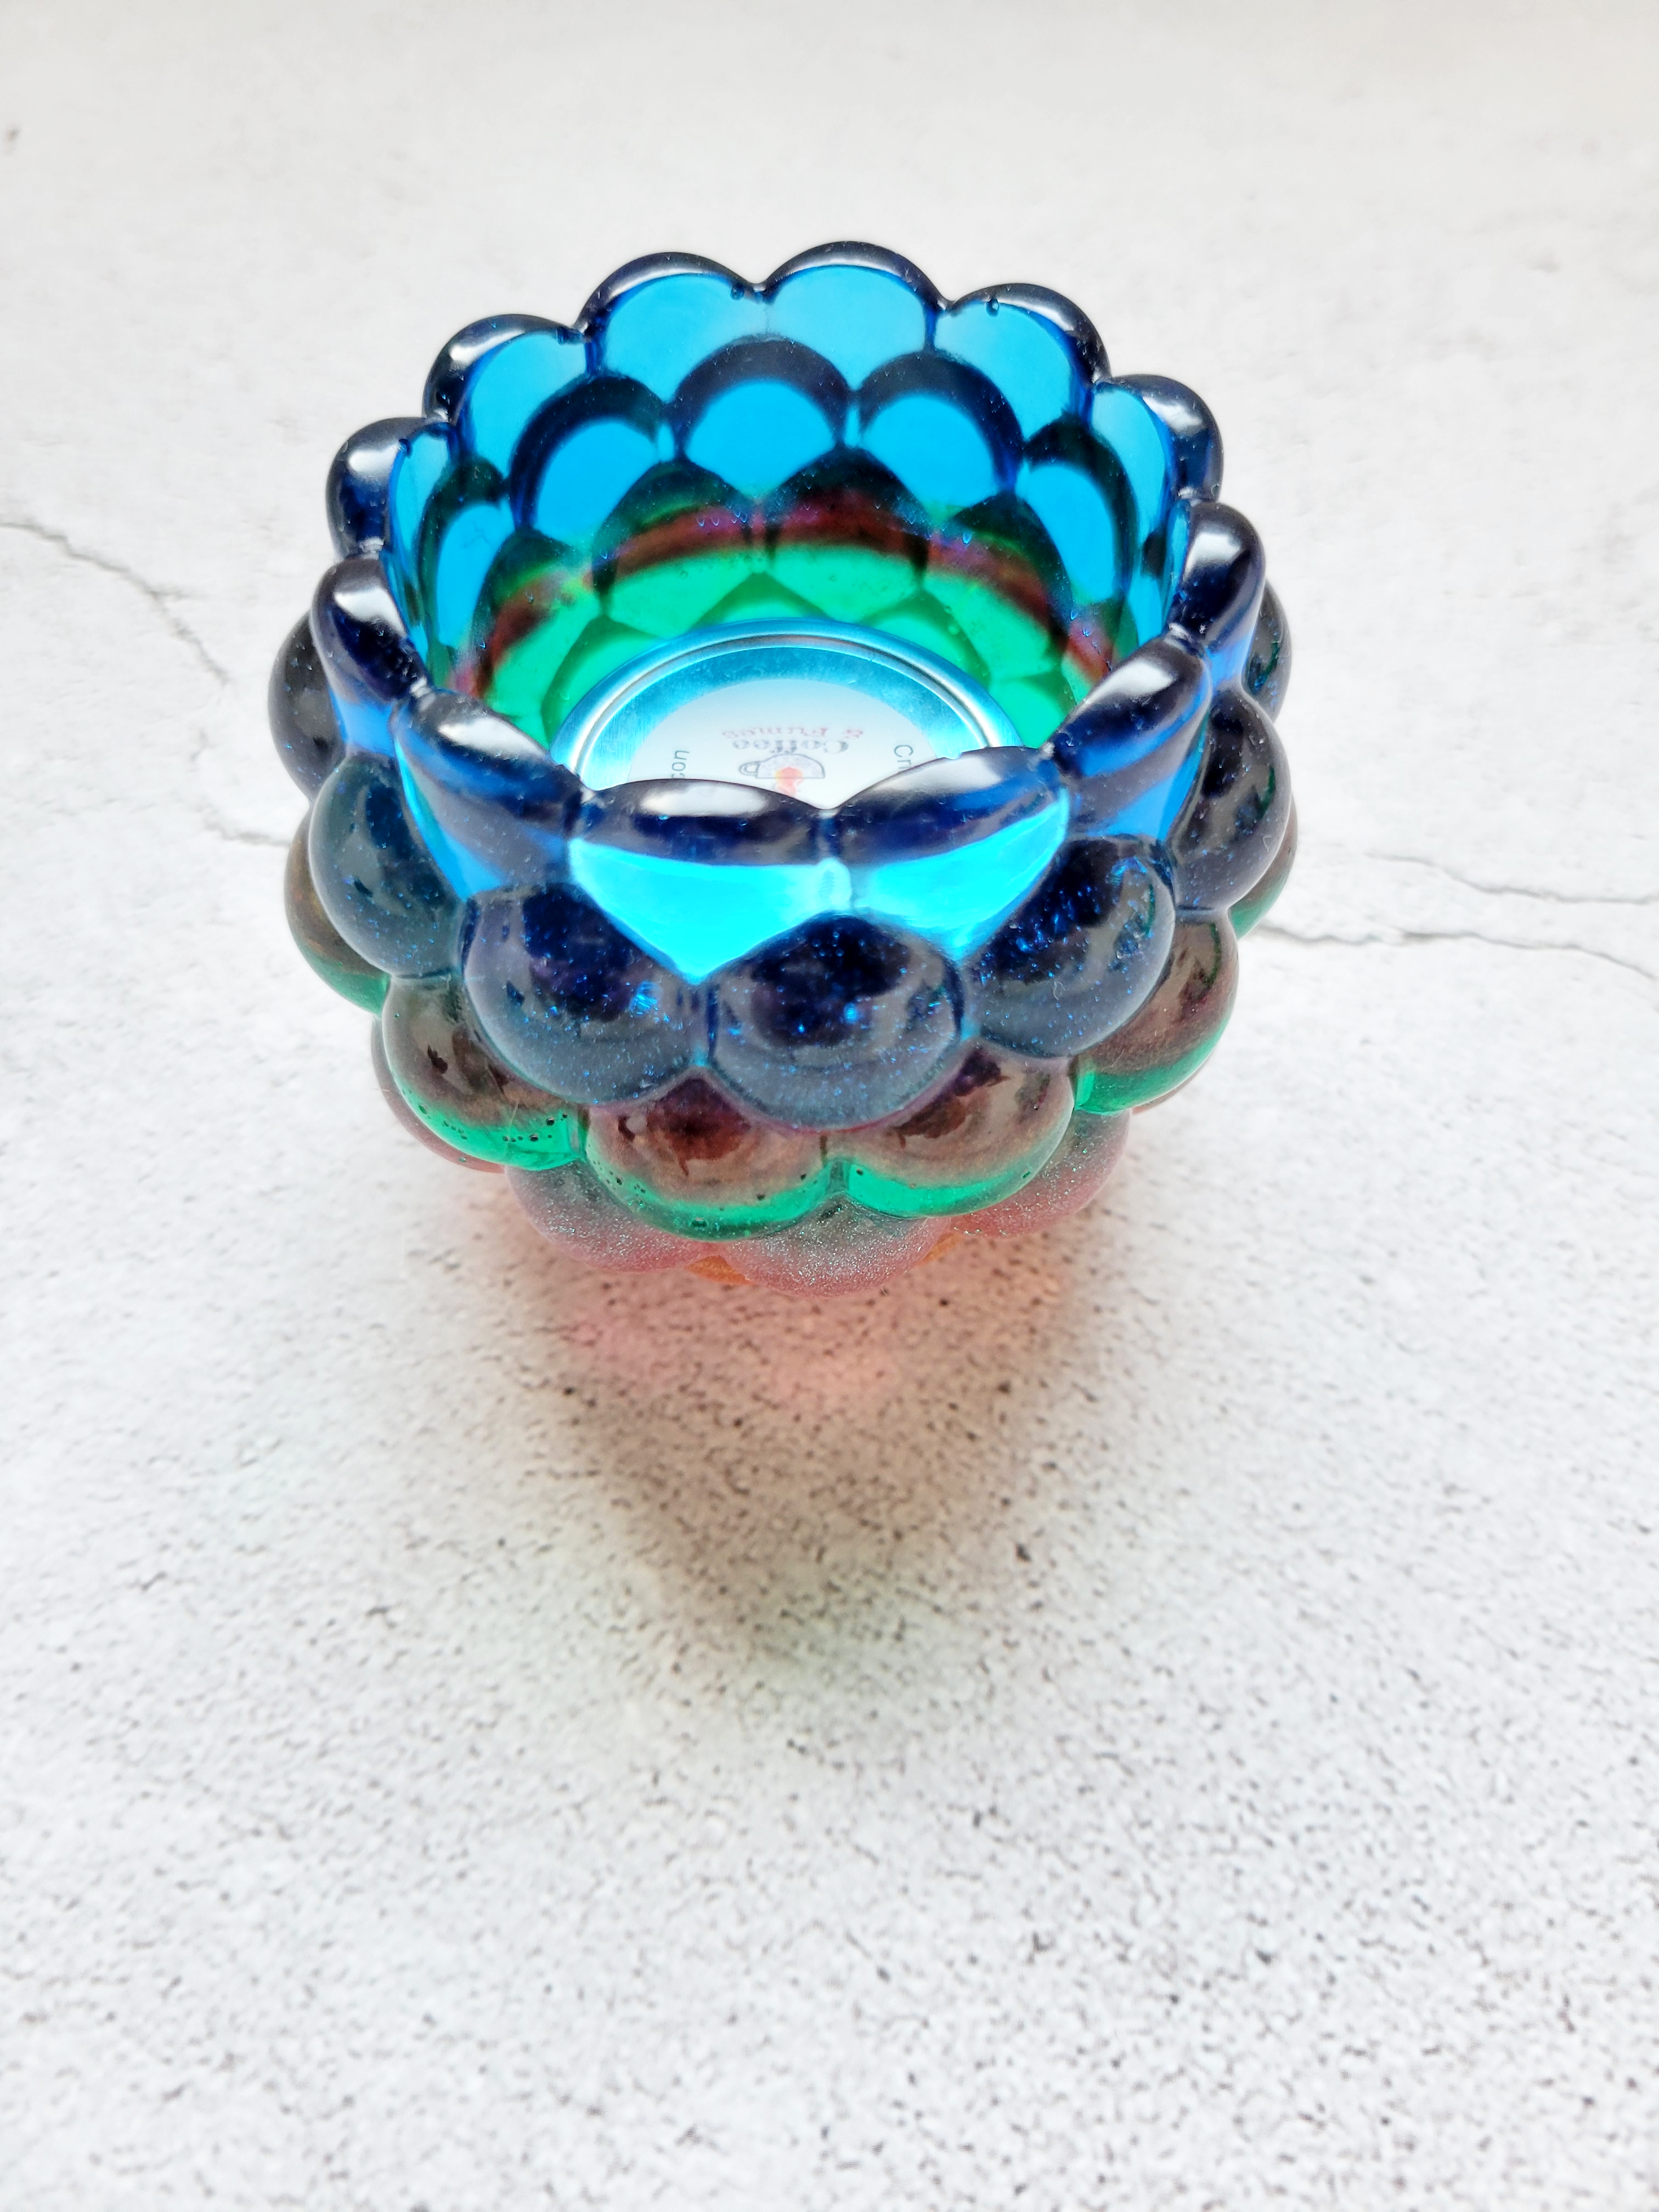 A side view of a tealight candle holder with a bubbled look. It's layered with colors of blue, red, green, orange. There is a tealight candle inside to show size comparison.